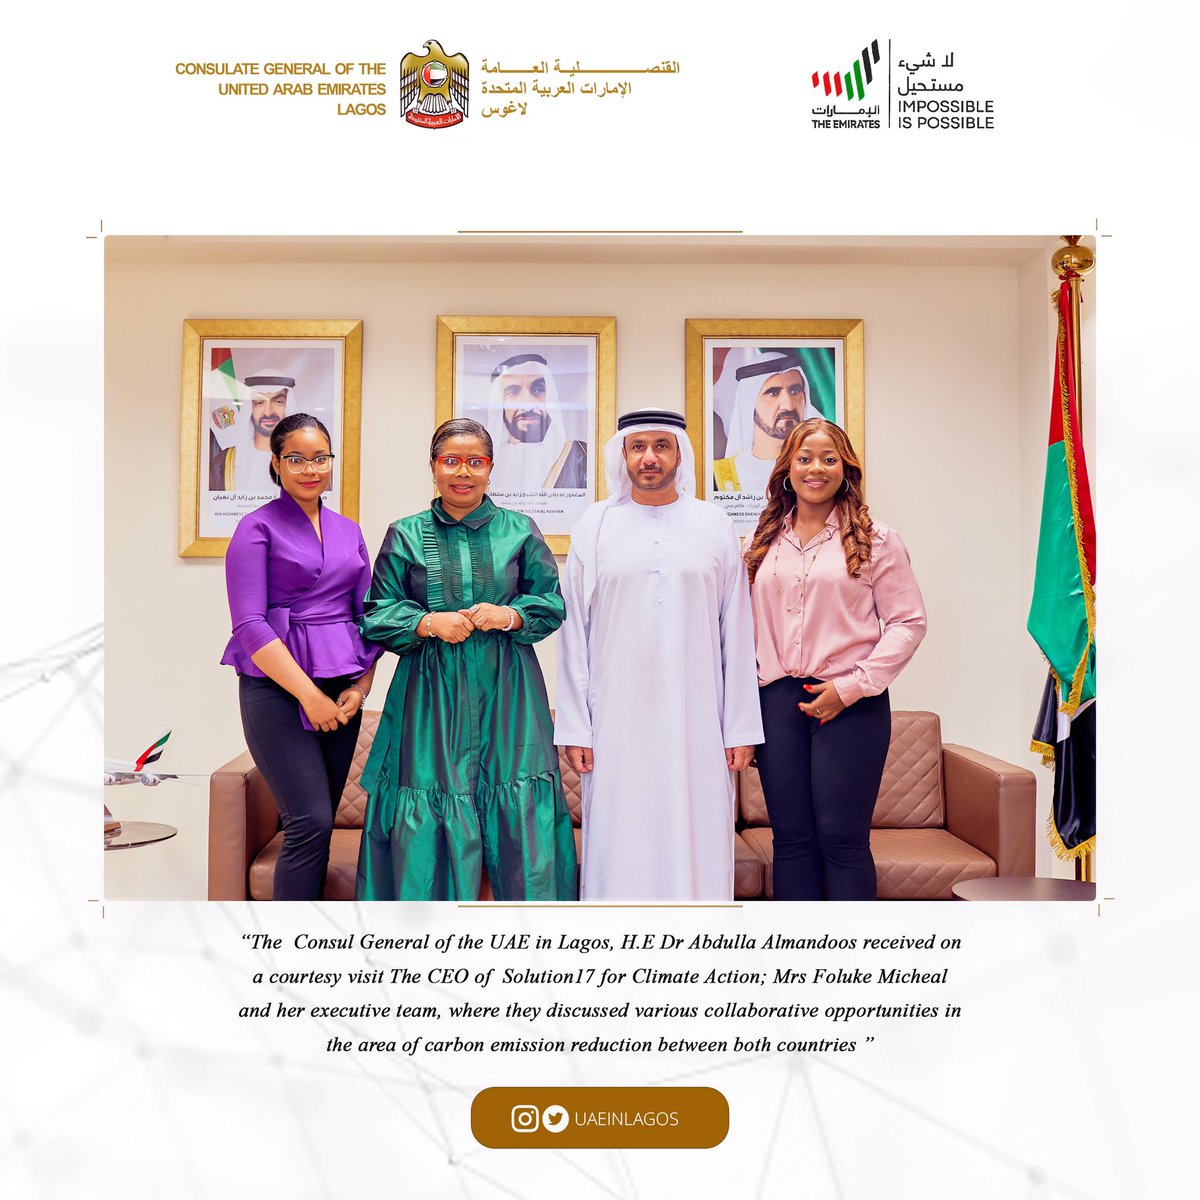 The Consul General of the UAE in Lagos, H.E Dr Abdulla Almandoos received on his offices ba courtesy visit The CEO of Solution17 for Climate Action; Mrs Foluke Micheal and her executive team, where they discussed various collaborative opportunities in the area of carbon emission…